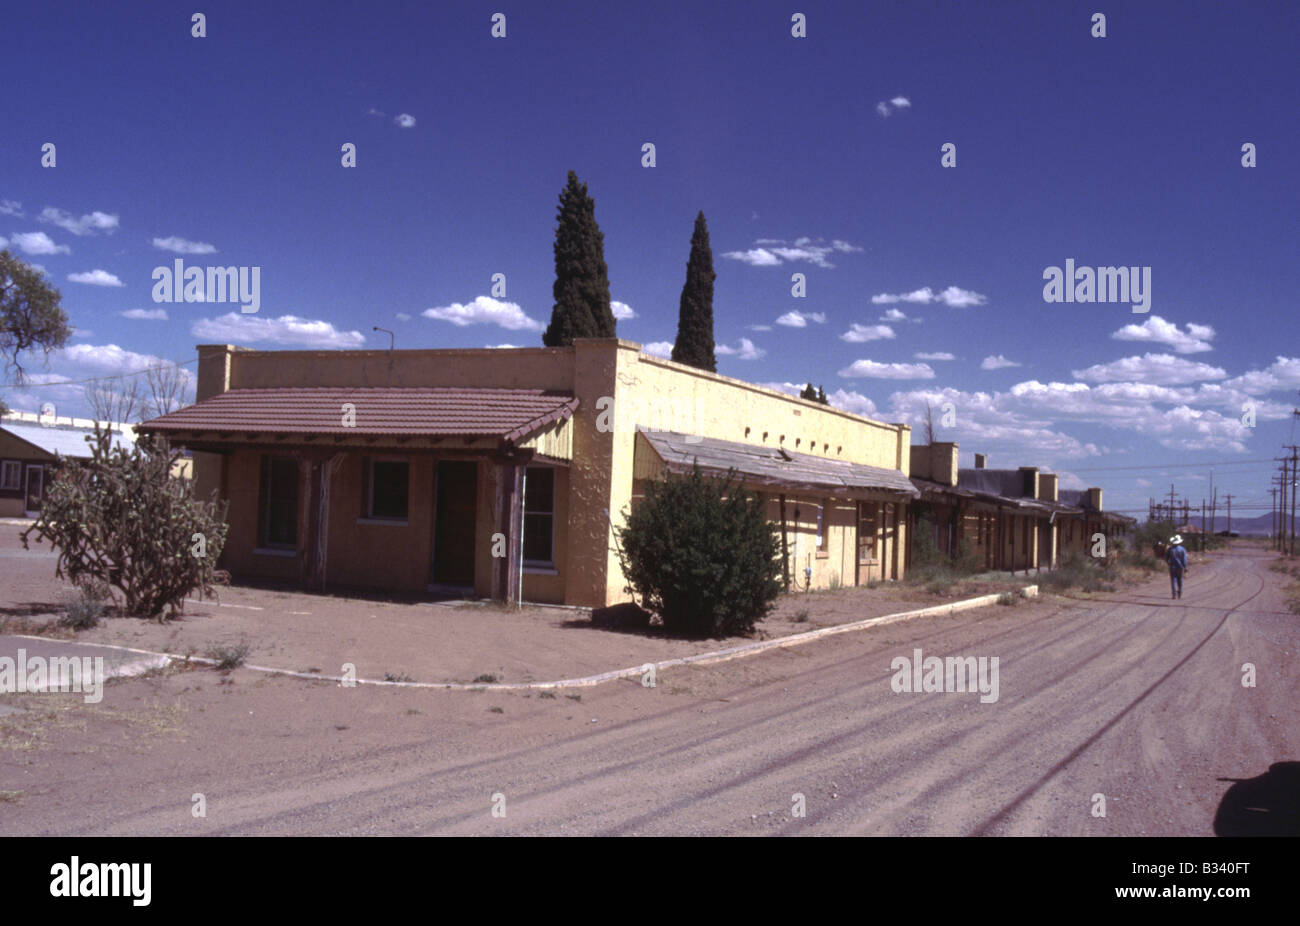 Street Scene with abandoned dwellings houses and dirt road in West Texas Stock Photo